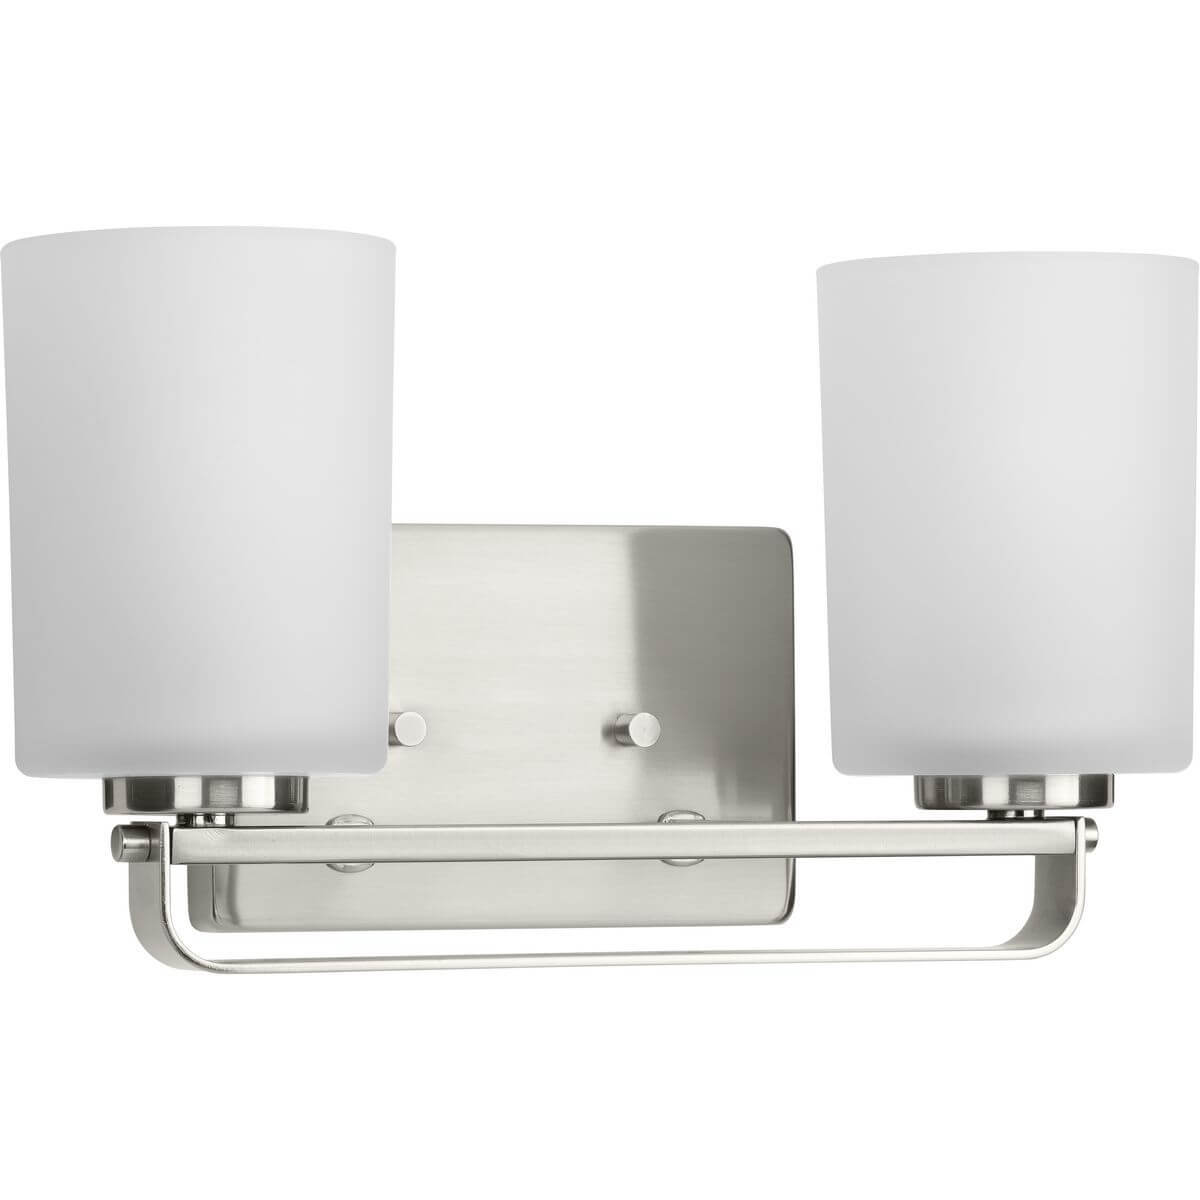 Progress Lighting League 2 Light 14 inch Bath Vanity Light in Brushed Nickel with Etched Glass P300342-009